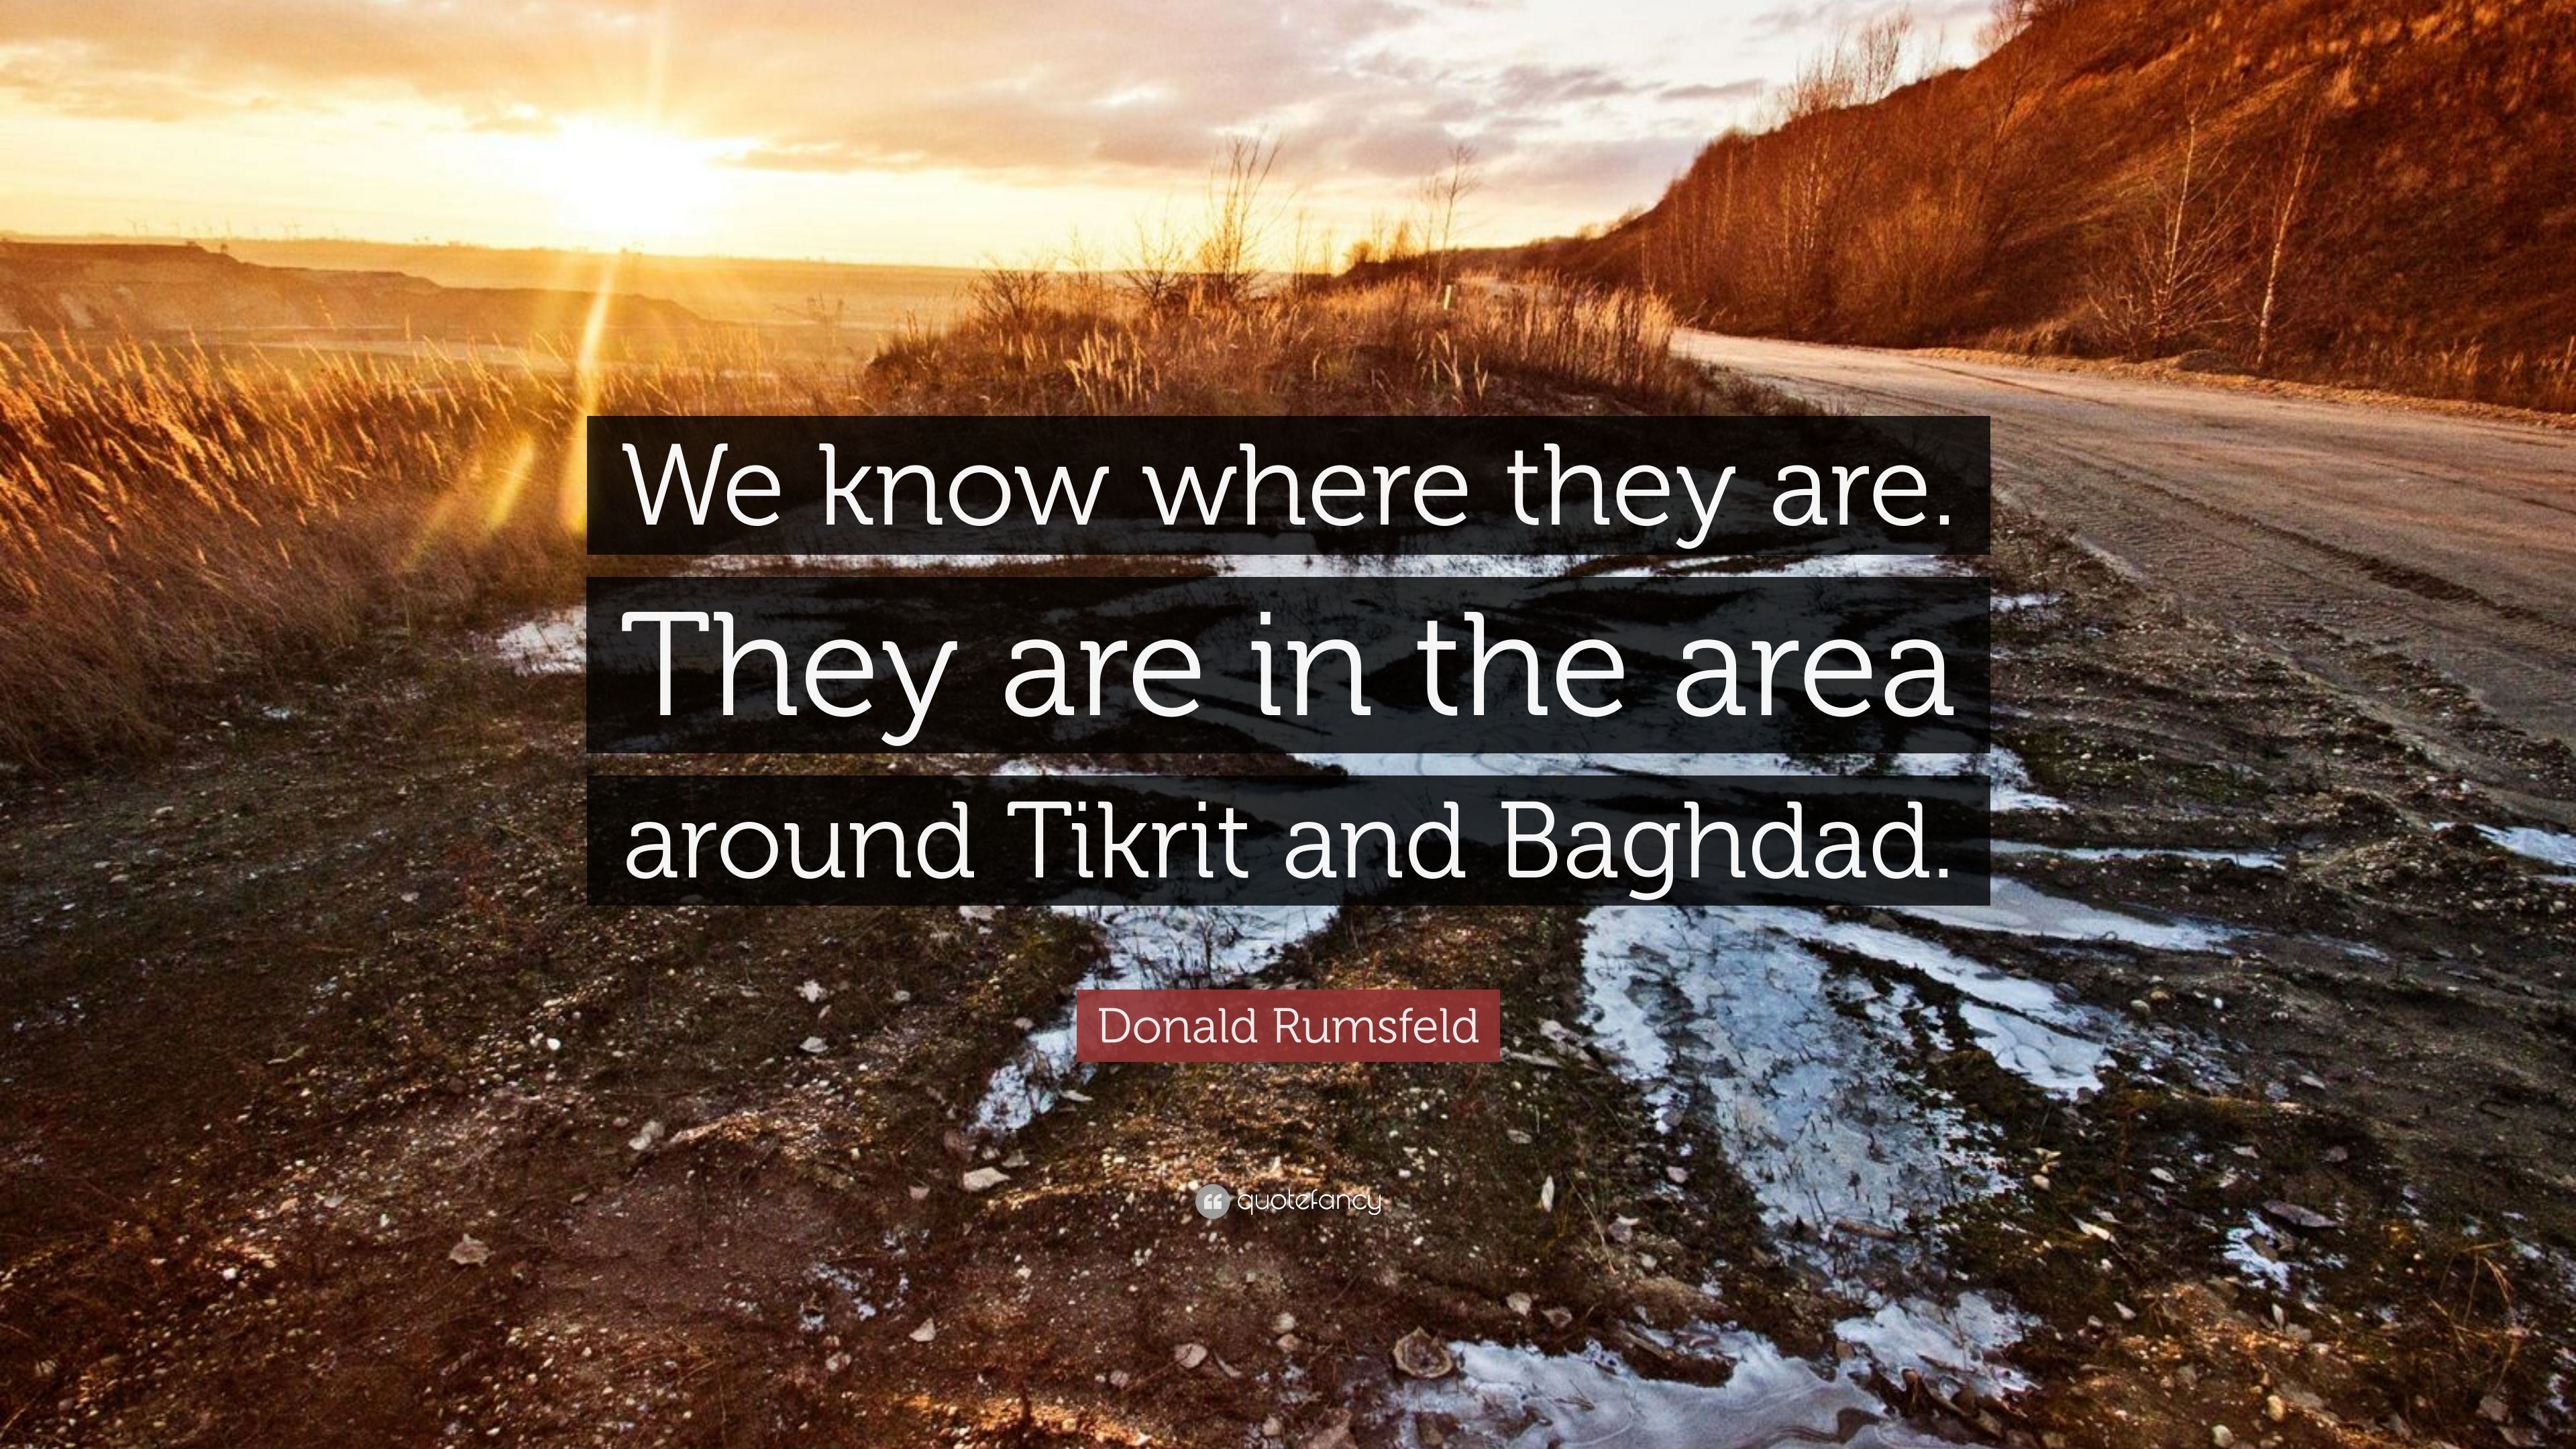 Donald Rumsfeld Quote: “We know where they are. They are in the area